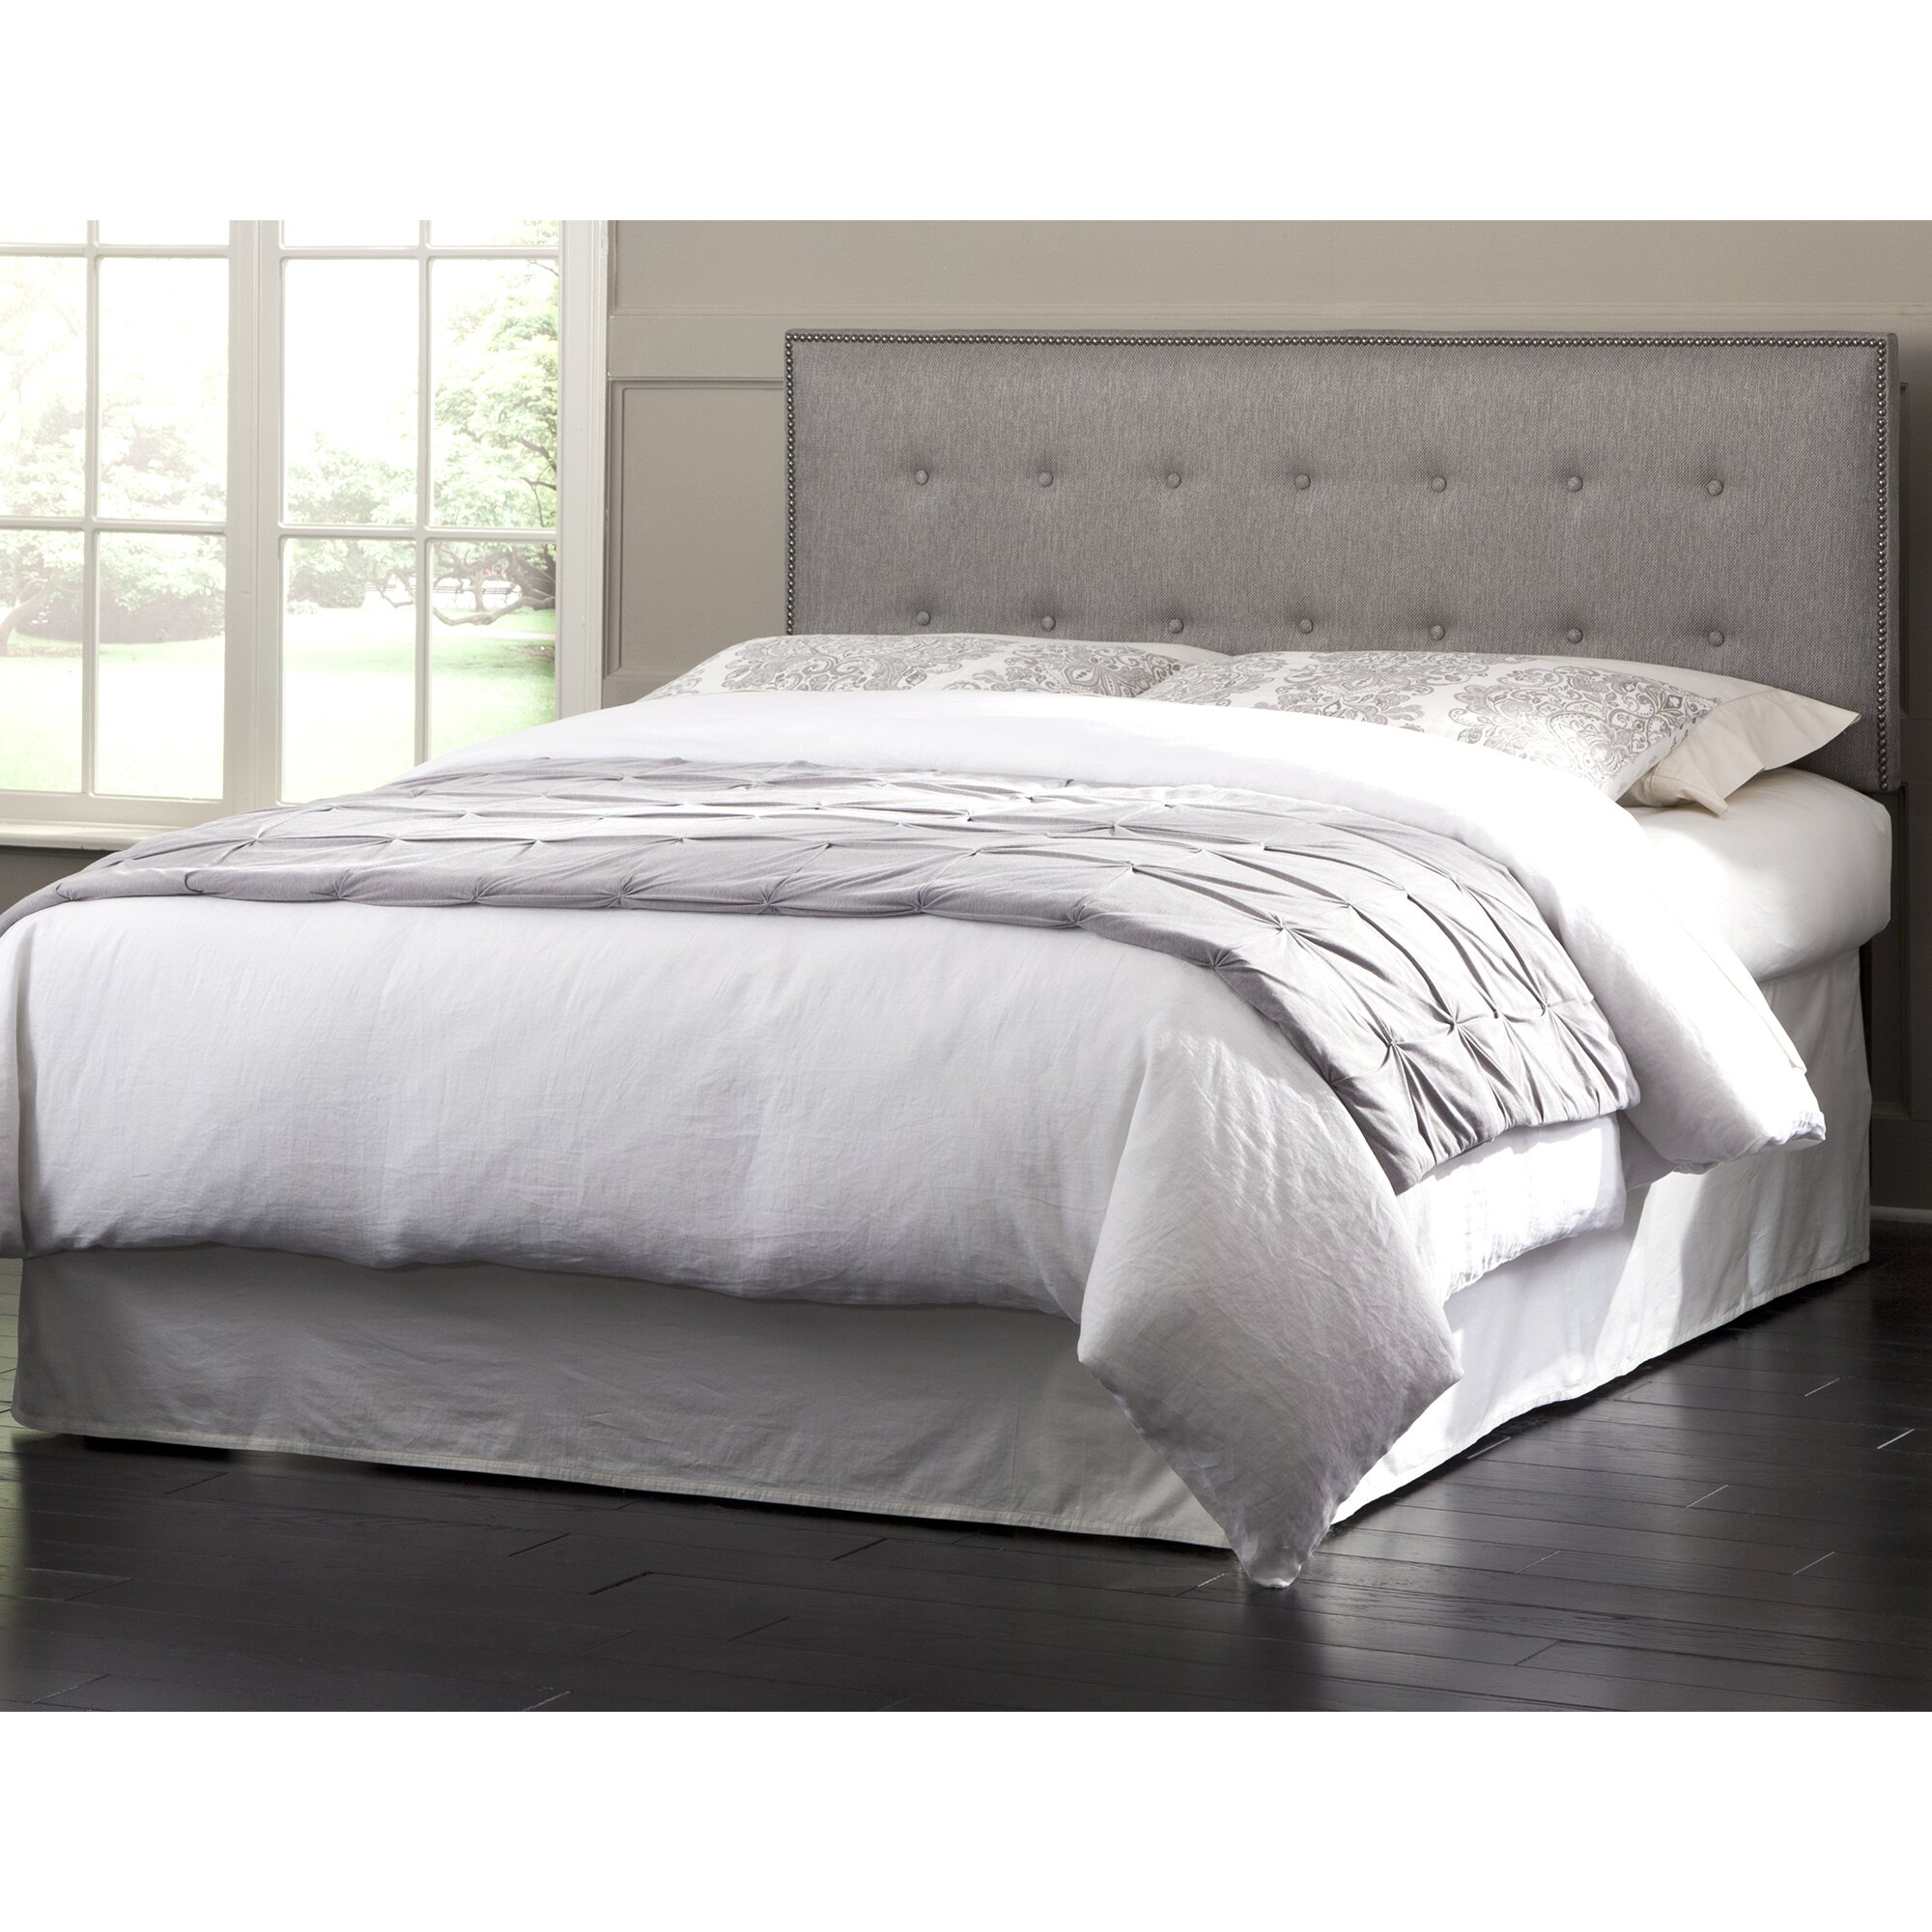 Fashion Bed Group Headboards 69